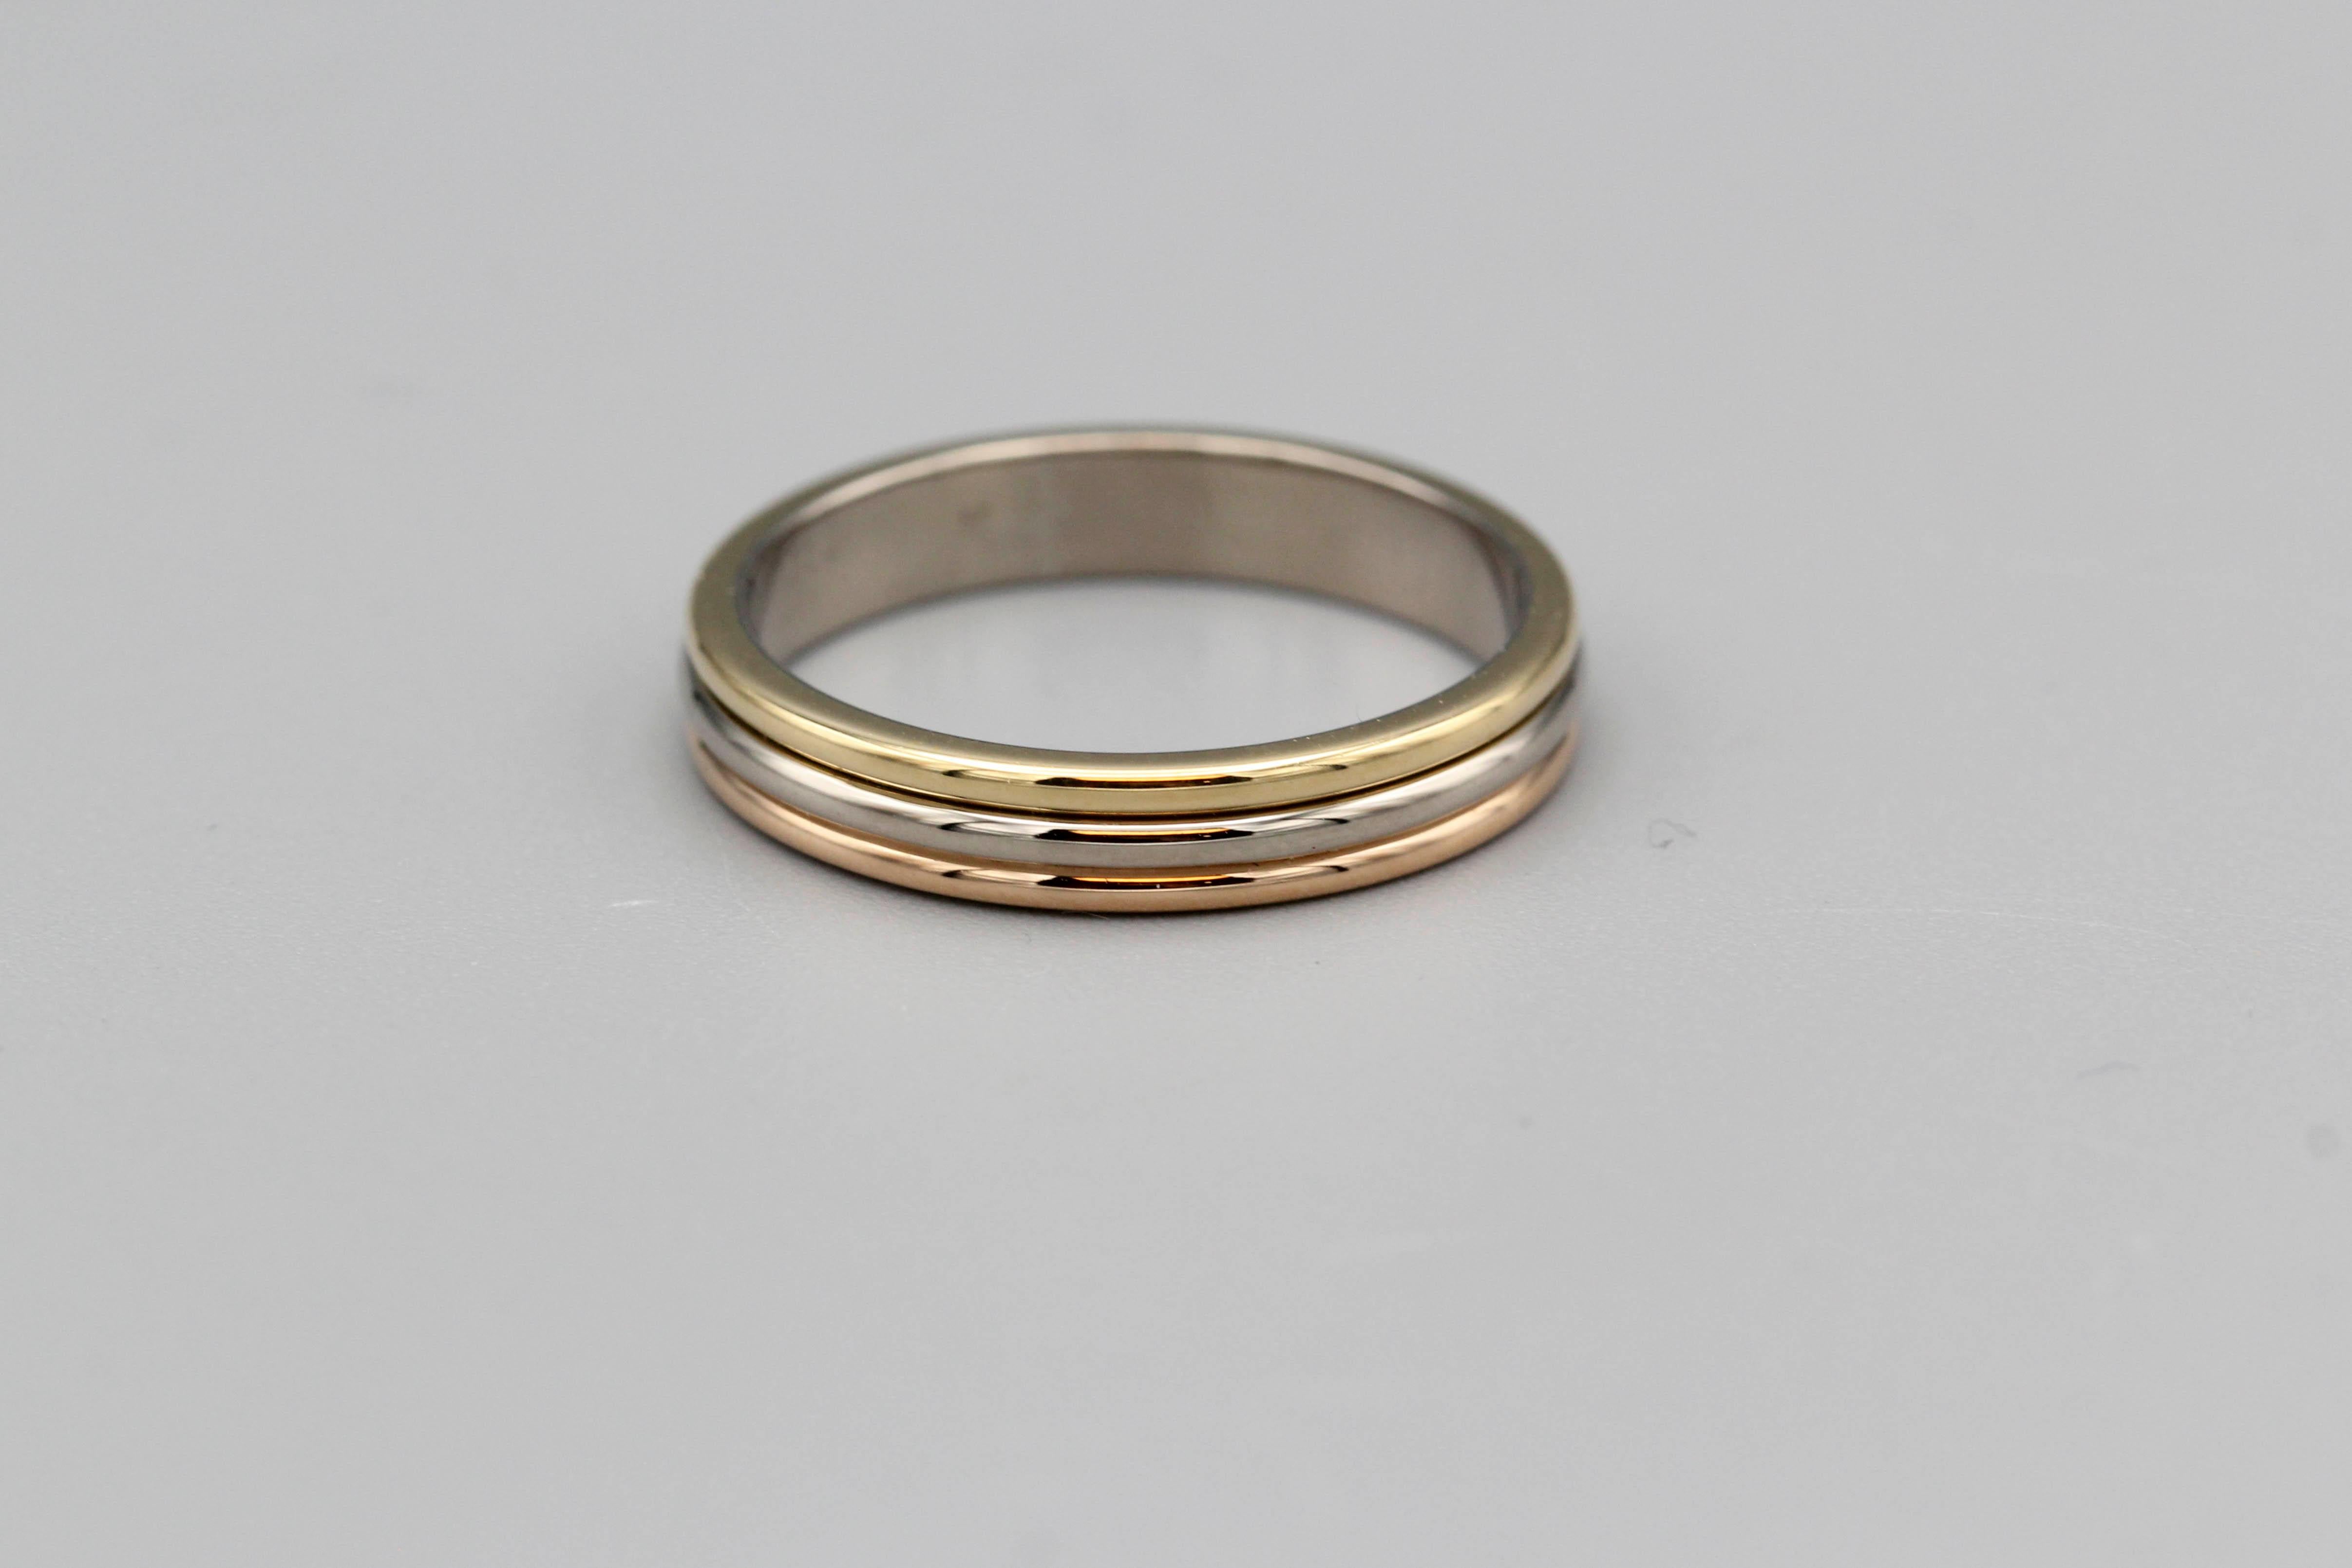 Timeless 18K 3 color gold band from the 